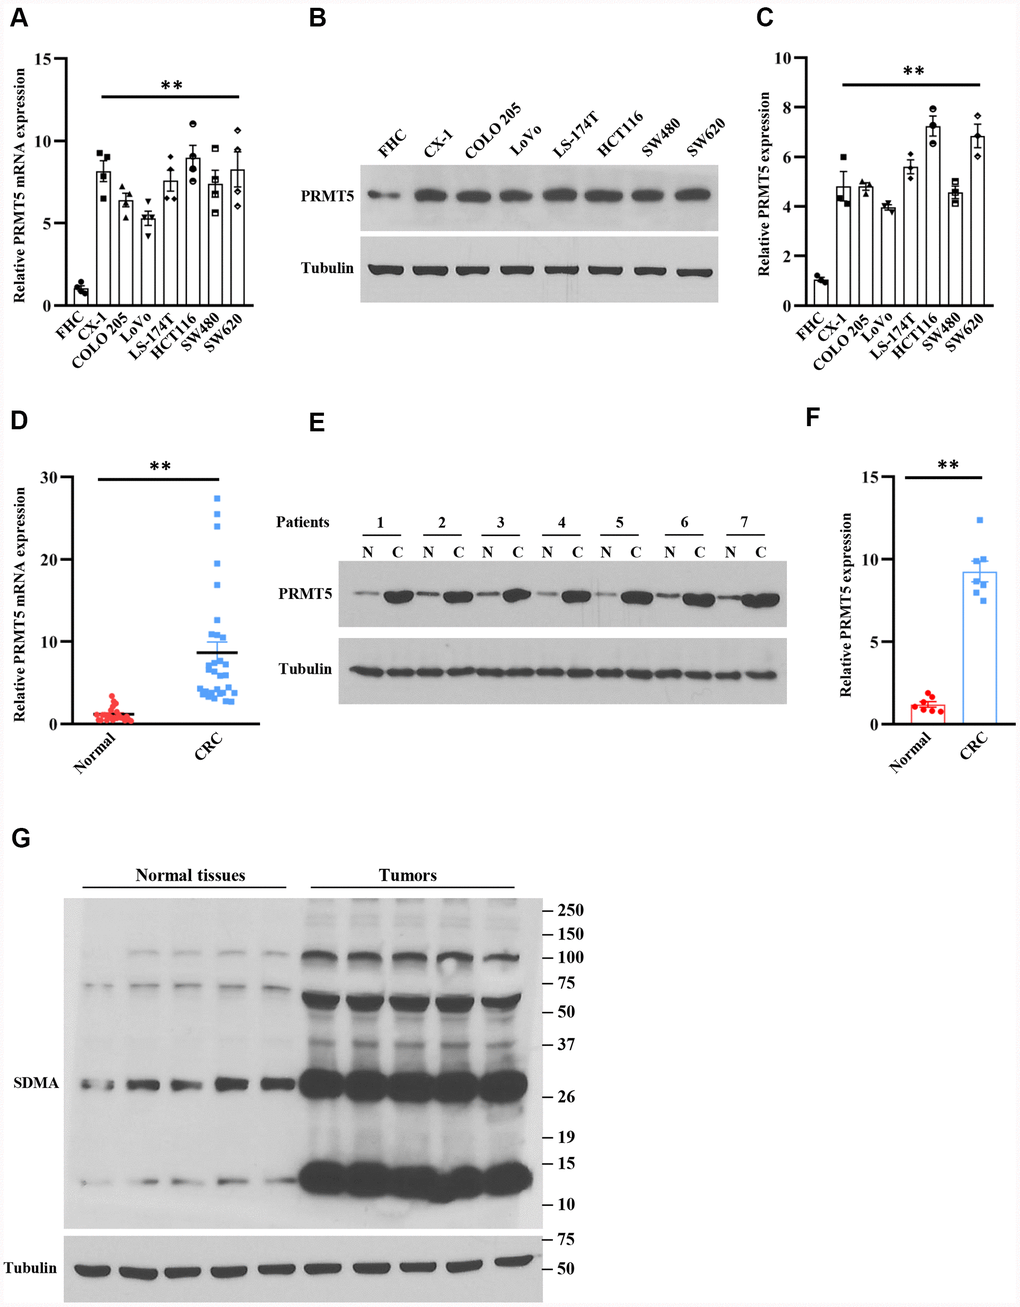 PRMT5 is highly expressed in human colorectal cancer cells and tissues. (A) The mRNA expression level of PRMT5 in various human colorectal tumor cell lines and normal colonic mucosal FHC cells (n=4). **P B) Western blot analysis of PRMT5 protein expression level in various human colorectal tumor cell lines and normal colonic mucosal FHC cells. Representative data is shown. (C) PRMT5 protein expression level is quantified. **P D) qRT-PCR analysis of PRMT5 mRNA expression level in human colorectal cancer tissues and adjacent normal tissues (n=25-30). **P E) PRMT5 protein expression level is analyzed by Western blotting in human colorectal cancer tissues and adjacent normal tissues (n=7). Representative data is shown. (F) PRMT5 protein expression level is quantified. **P G) The global symmetric dimethylarginine (SDMA) is detected by Western blotting. Representative data is shown.